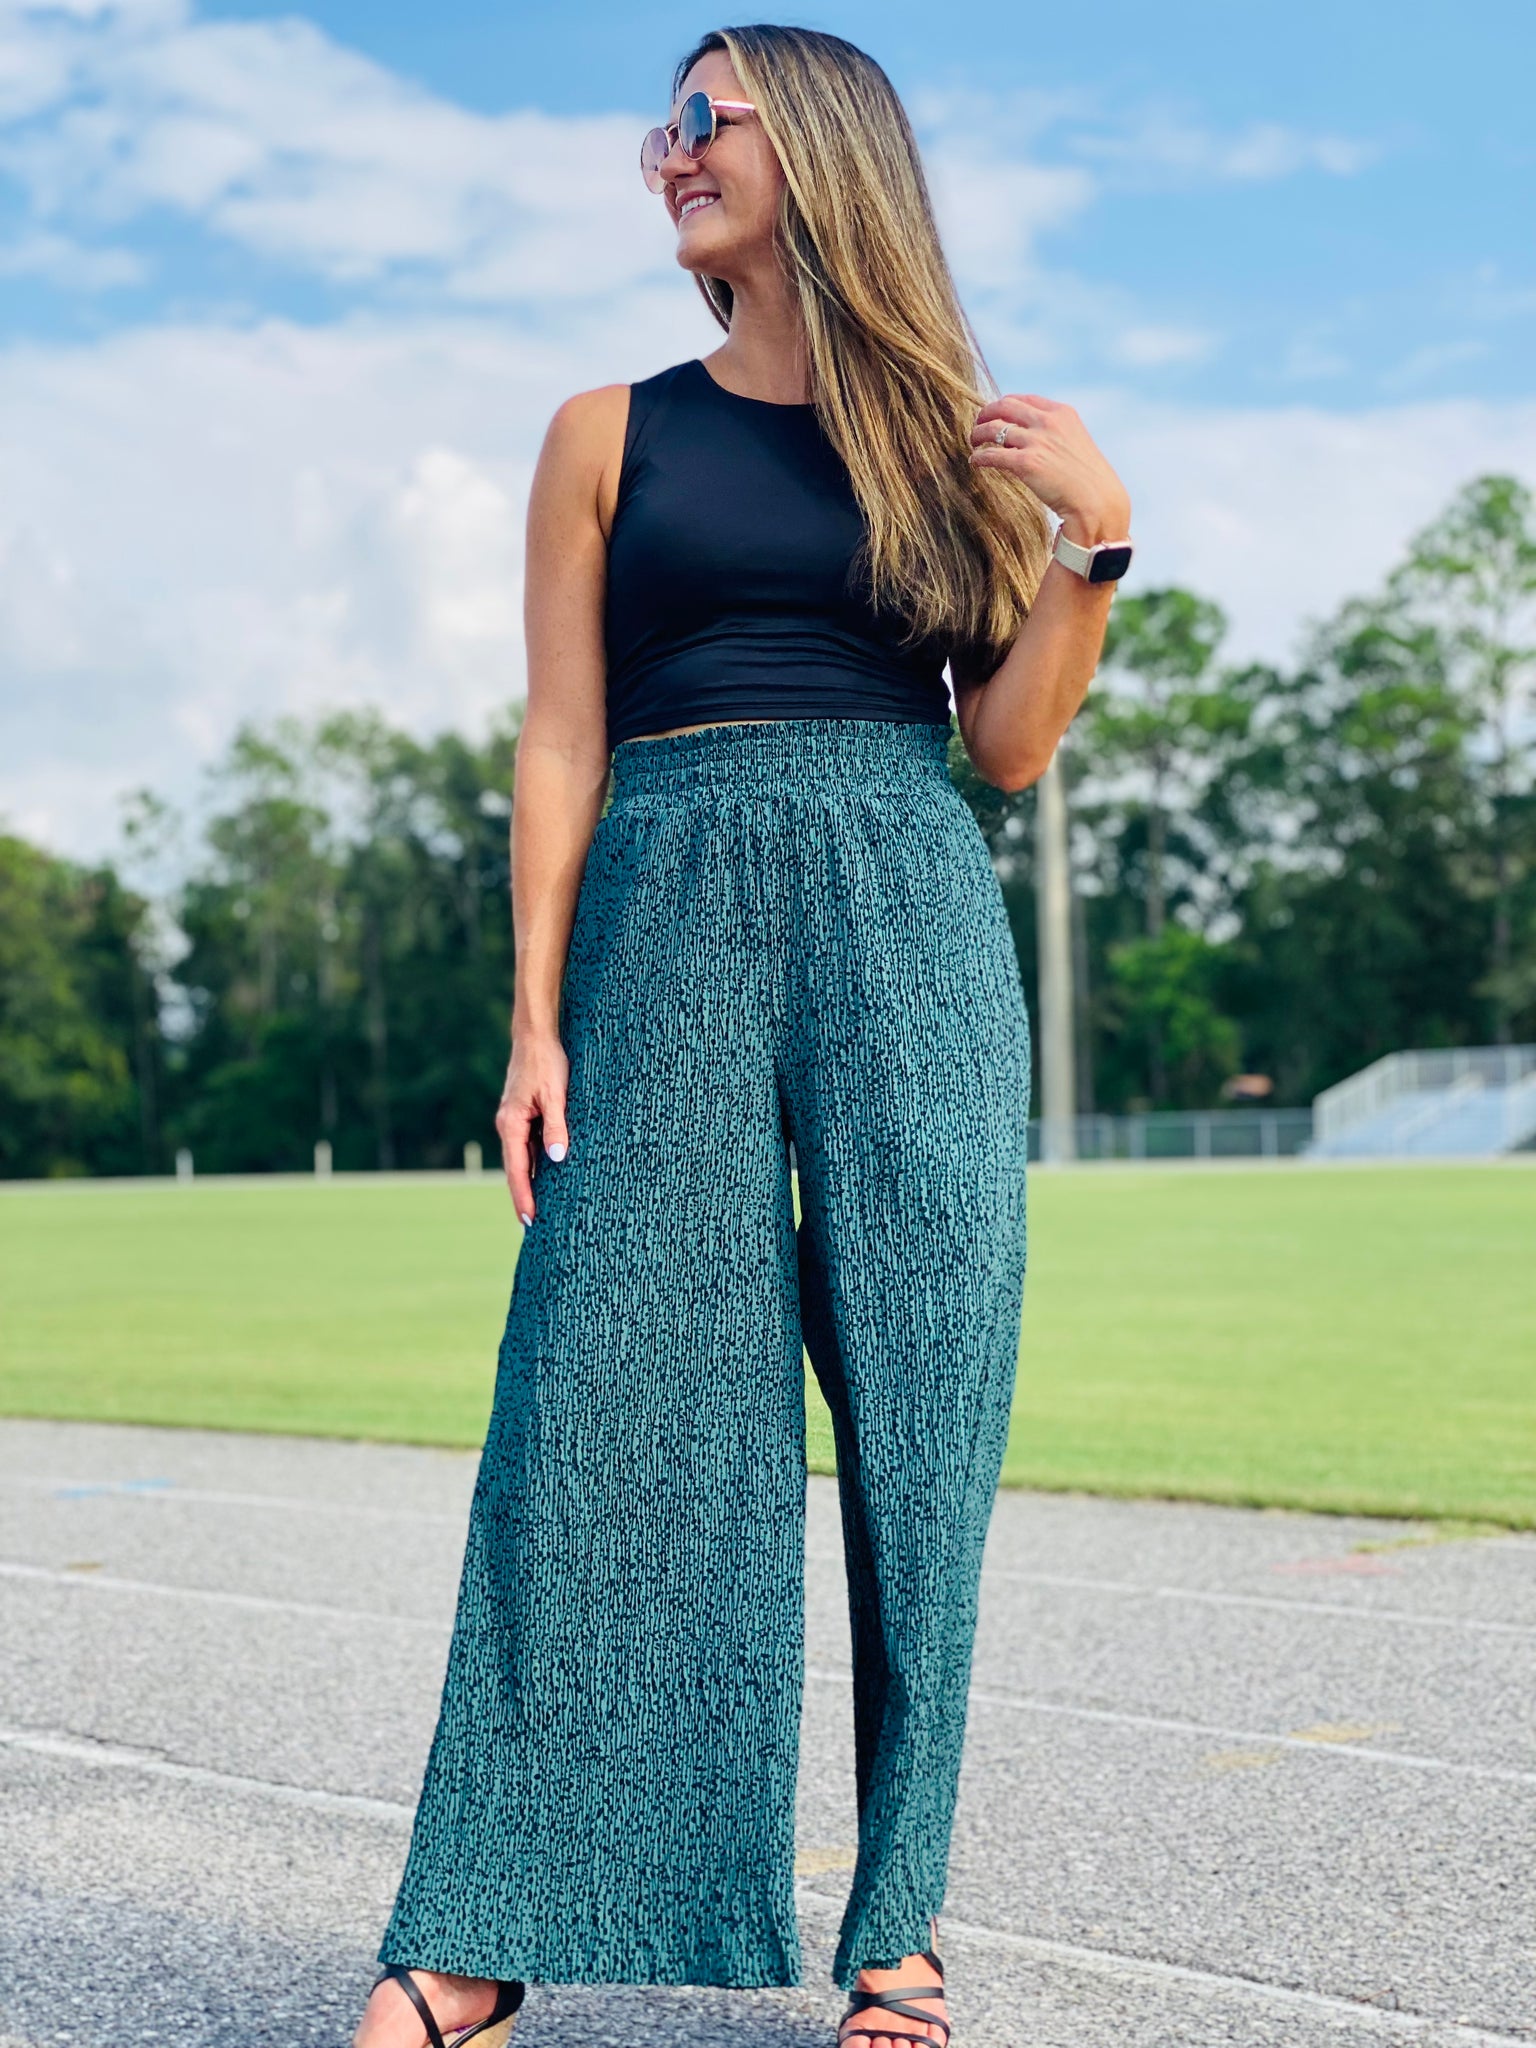 Teal Dotted Pants